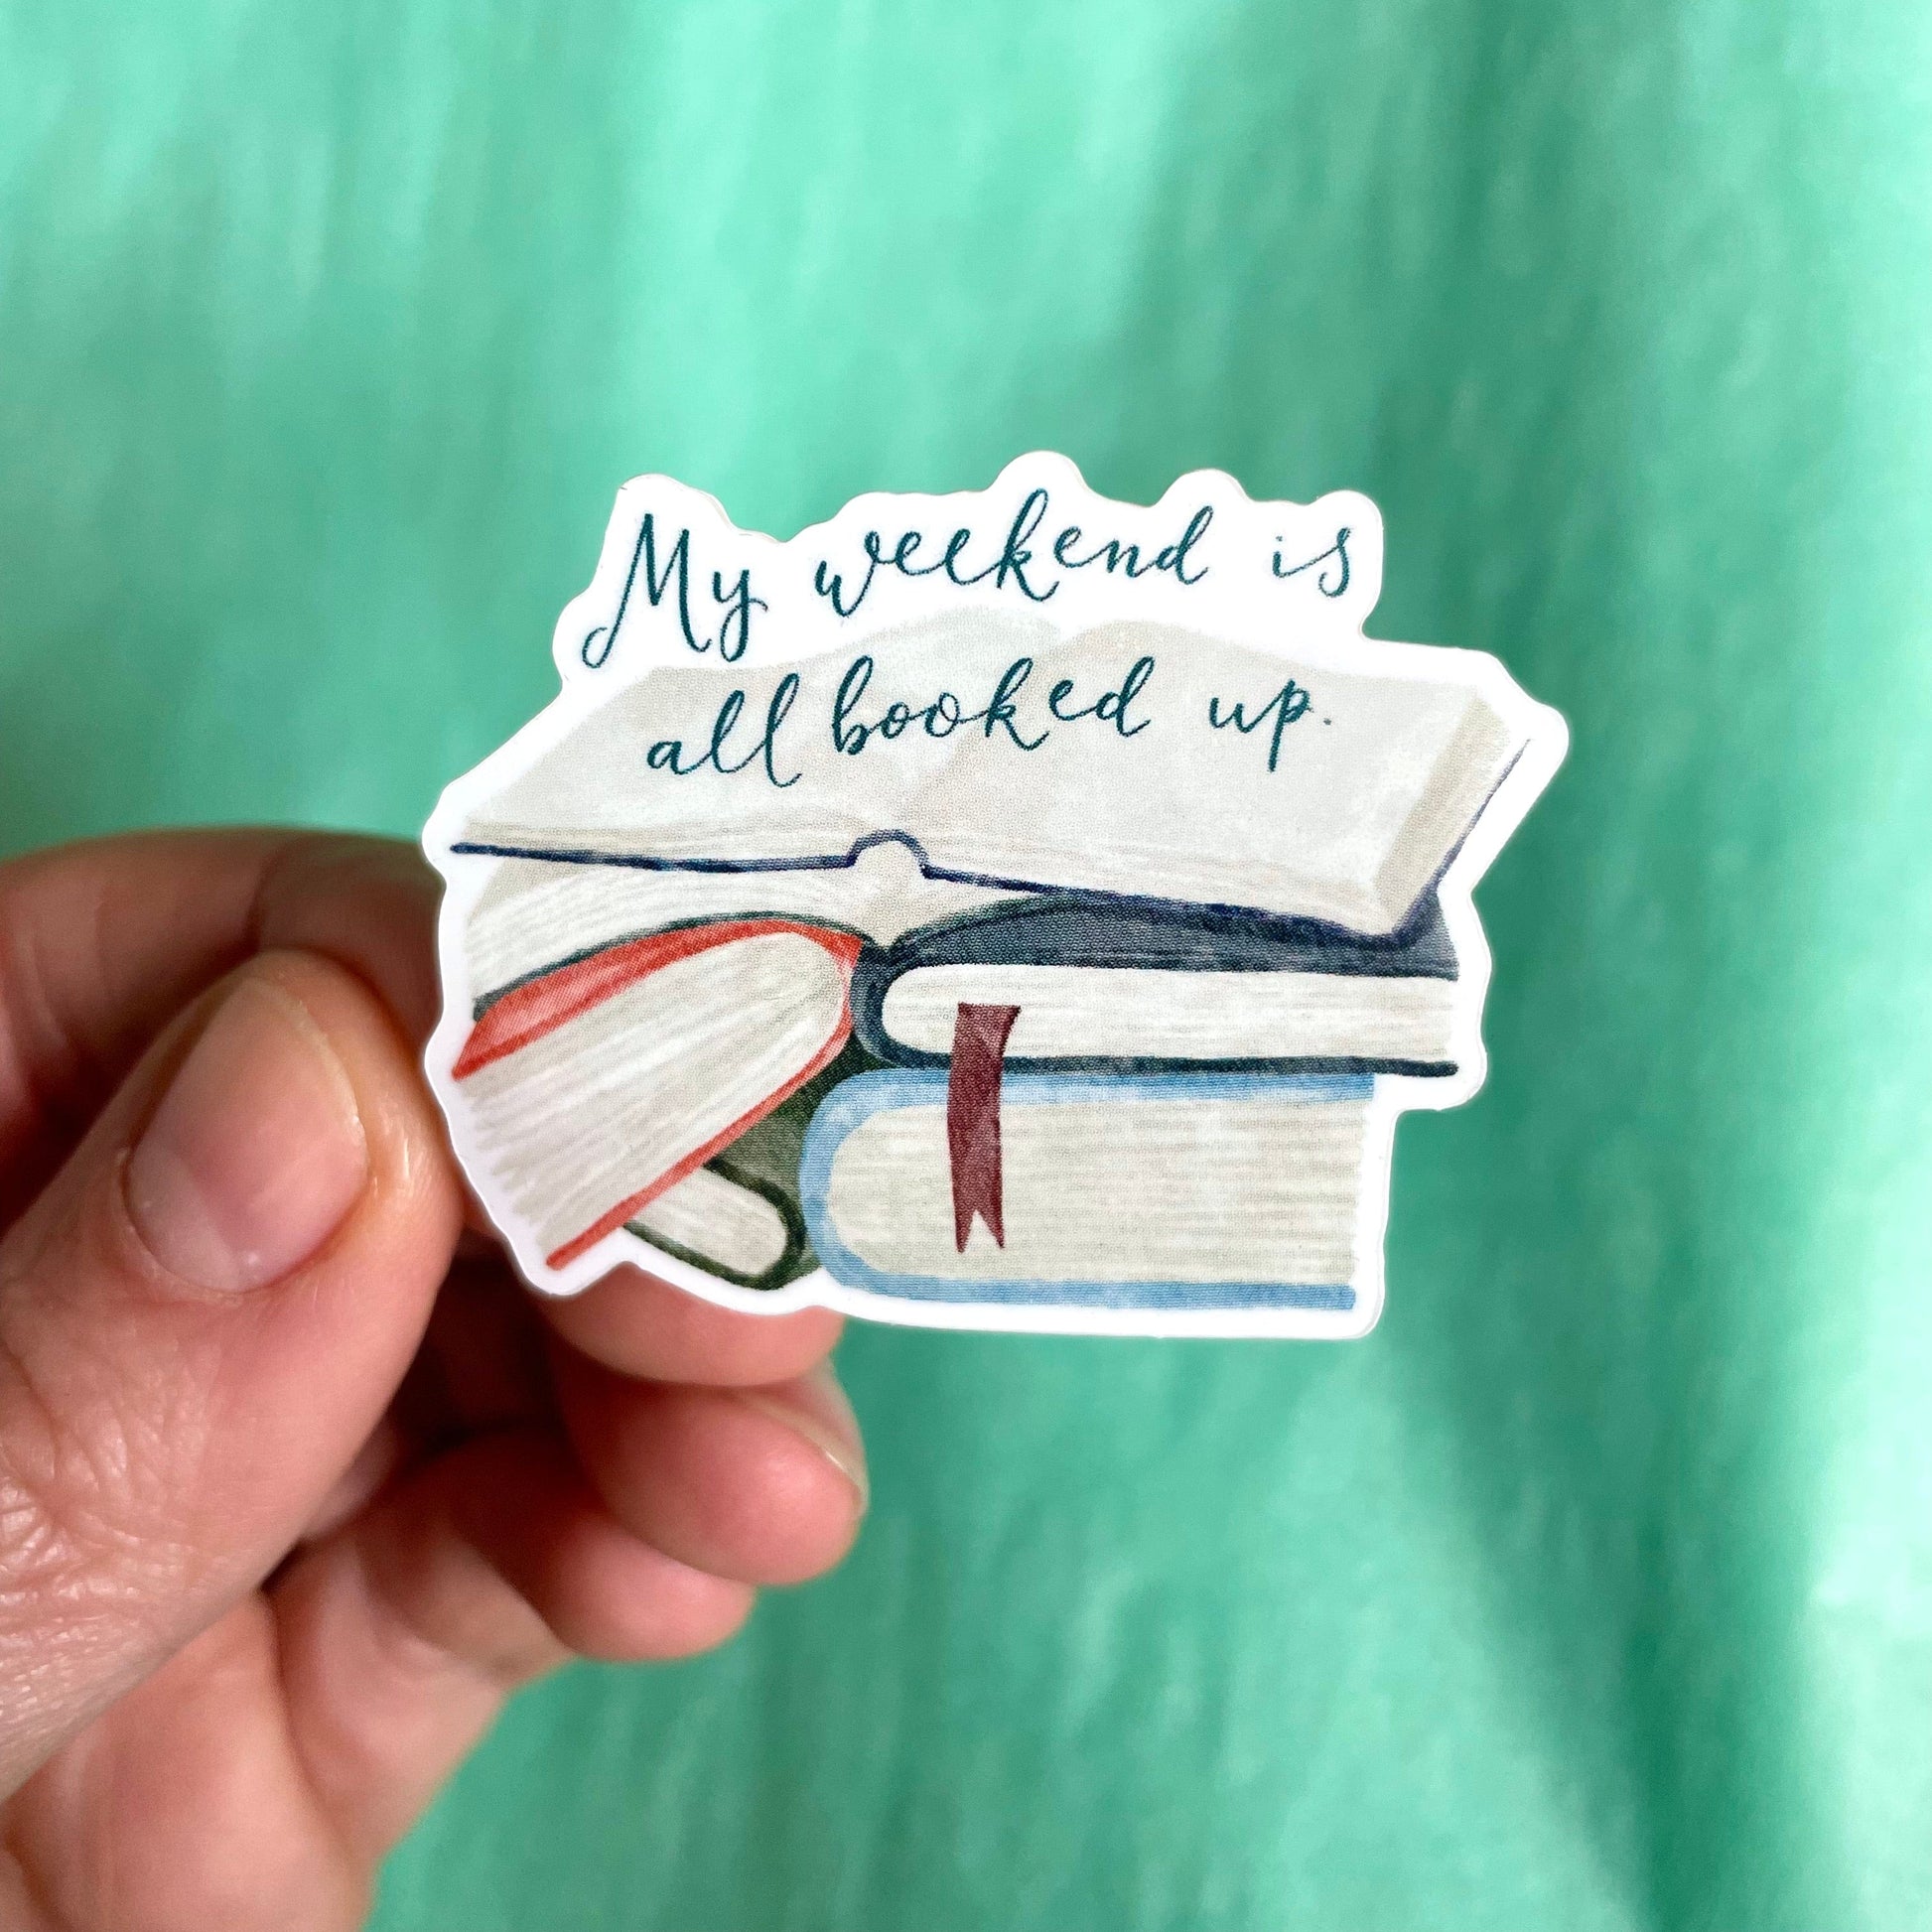 My weekend is all booked up - bookish sticker - vinyl stickers And Hope Designs   